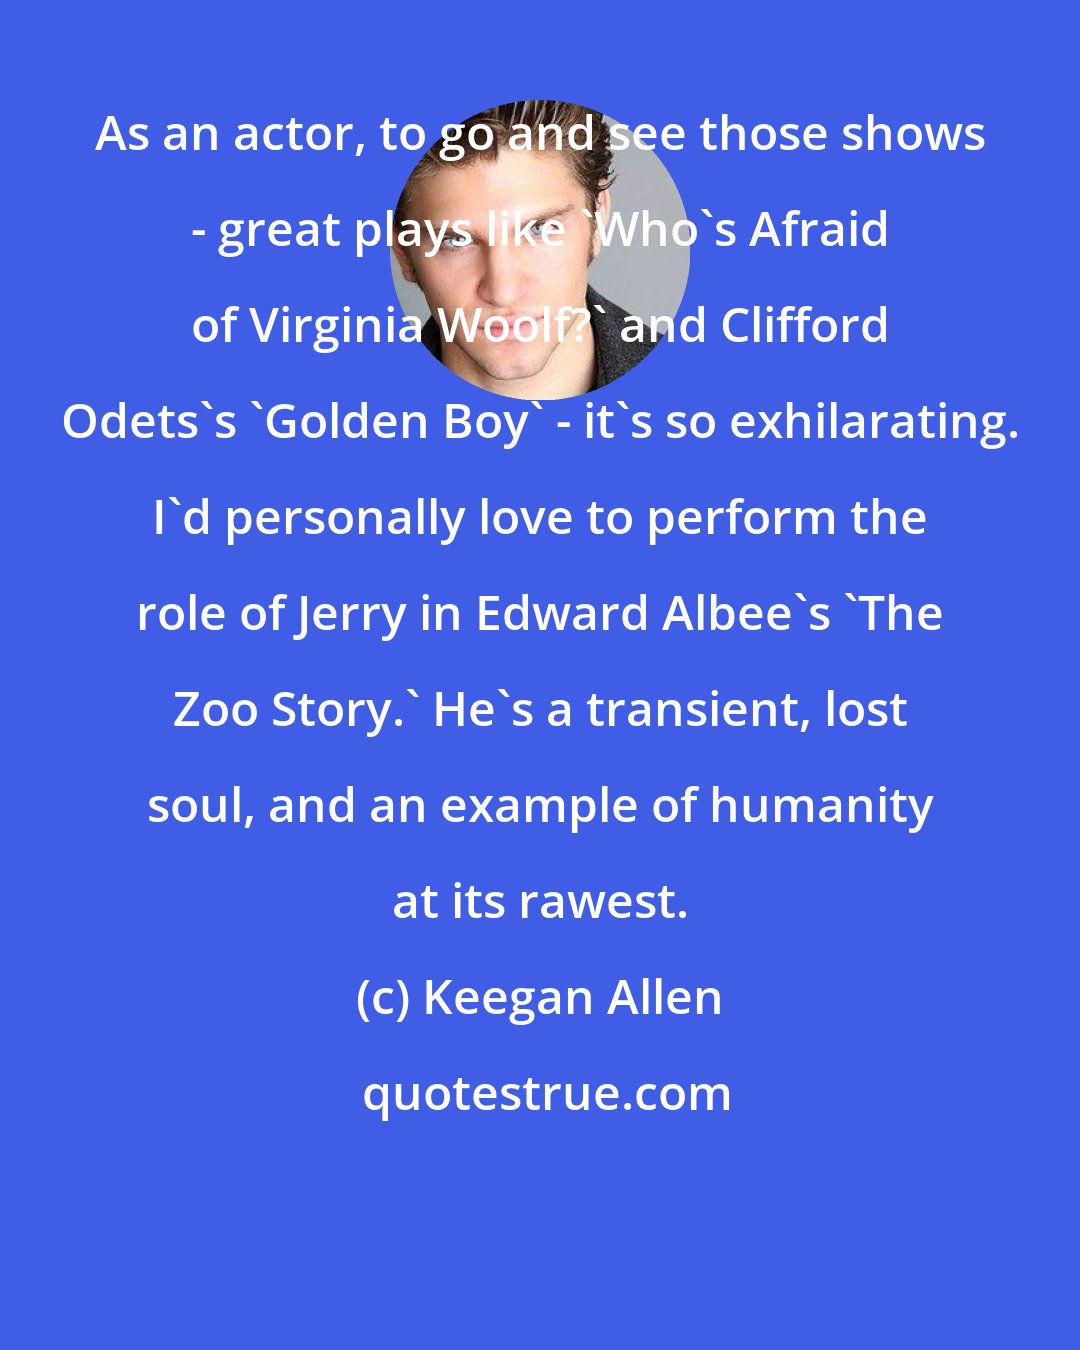 Keegan Allen: As an actor, to go and see those shows - great plays like 'Who's Afraid of Virginia Woolf?' and Clifford Odets's 'Golden Boy' - it's so exhilarating. I'd personally love to perform the role of Jerry in Edward Albee's 'The Zoo Story.' He's a transient, lost soul, and an example of humanity at its rawest.